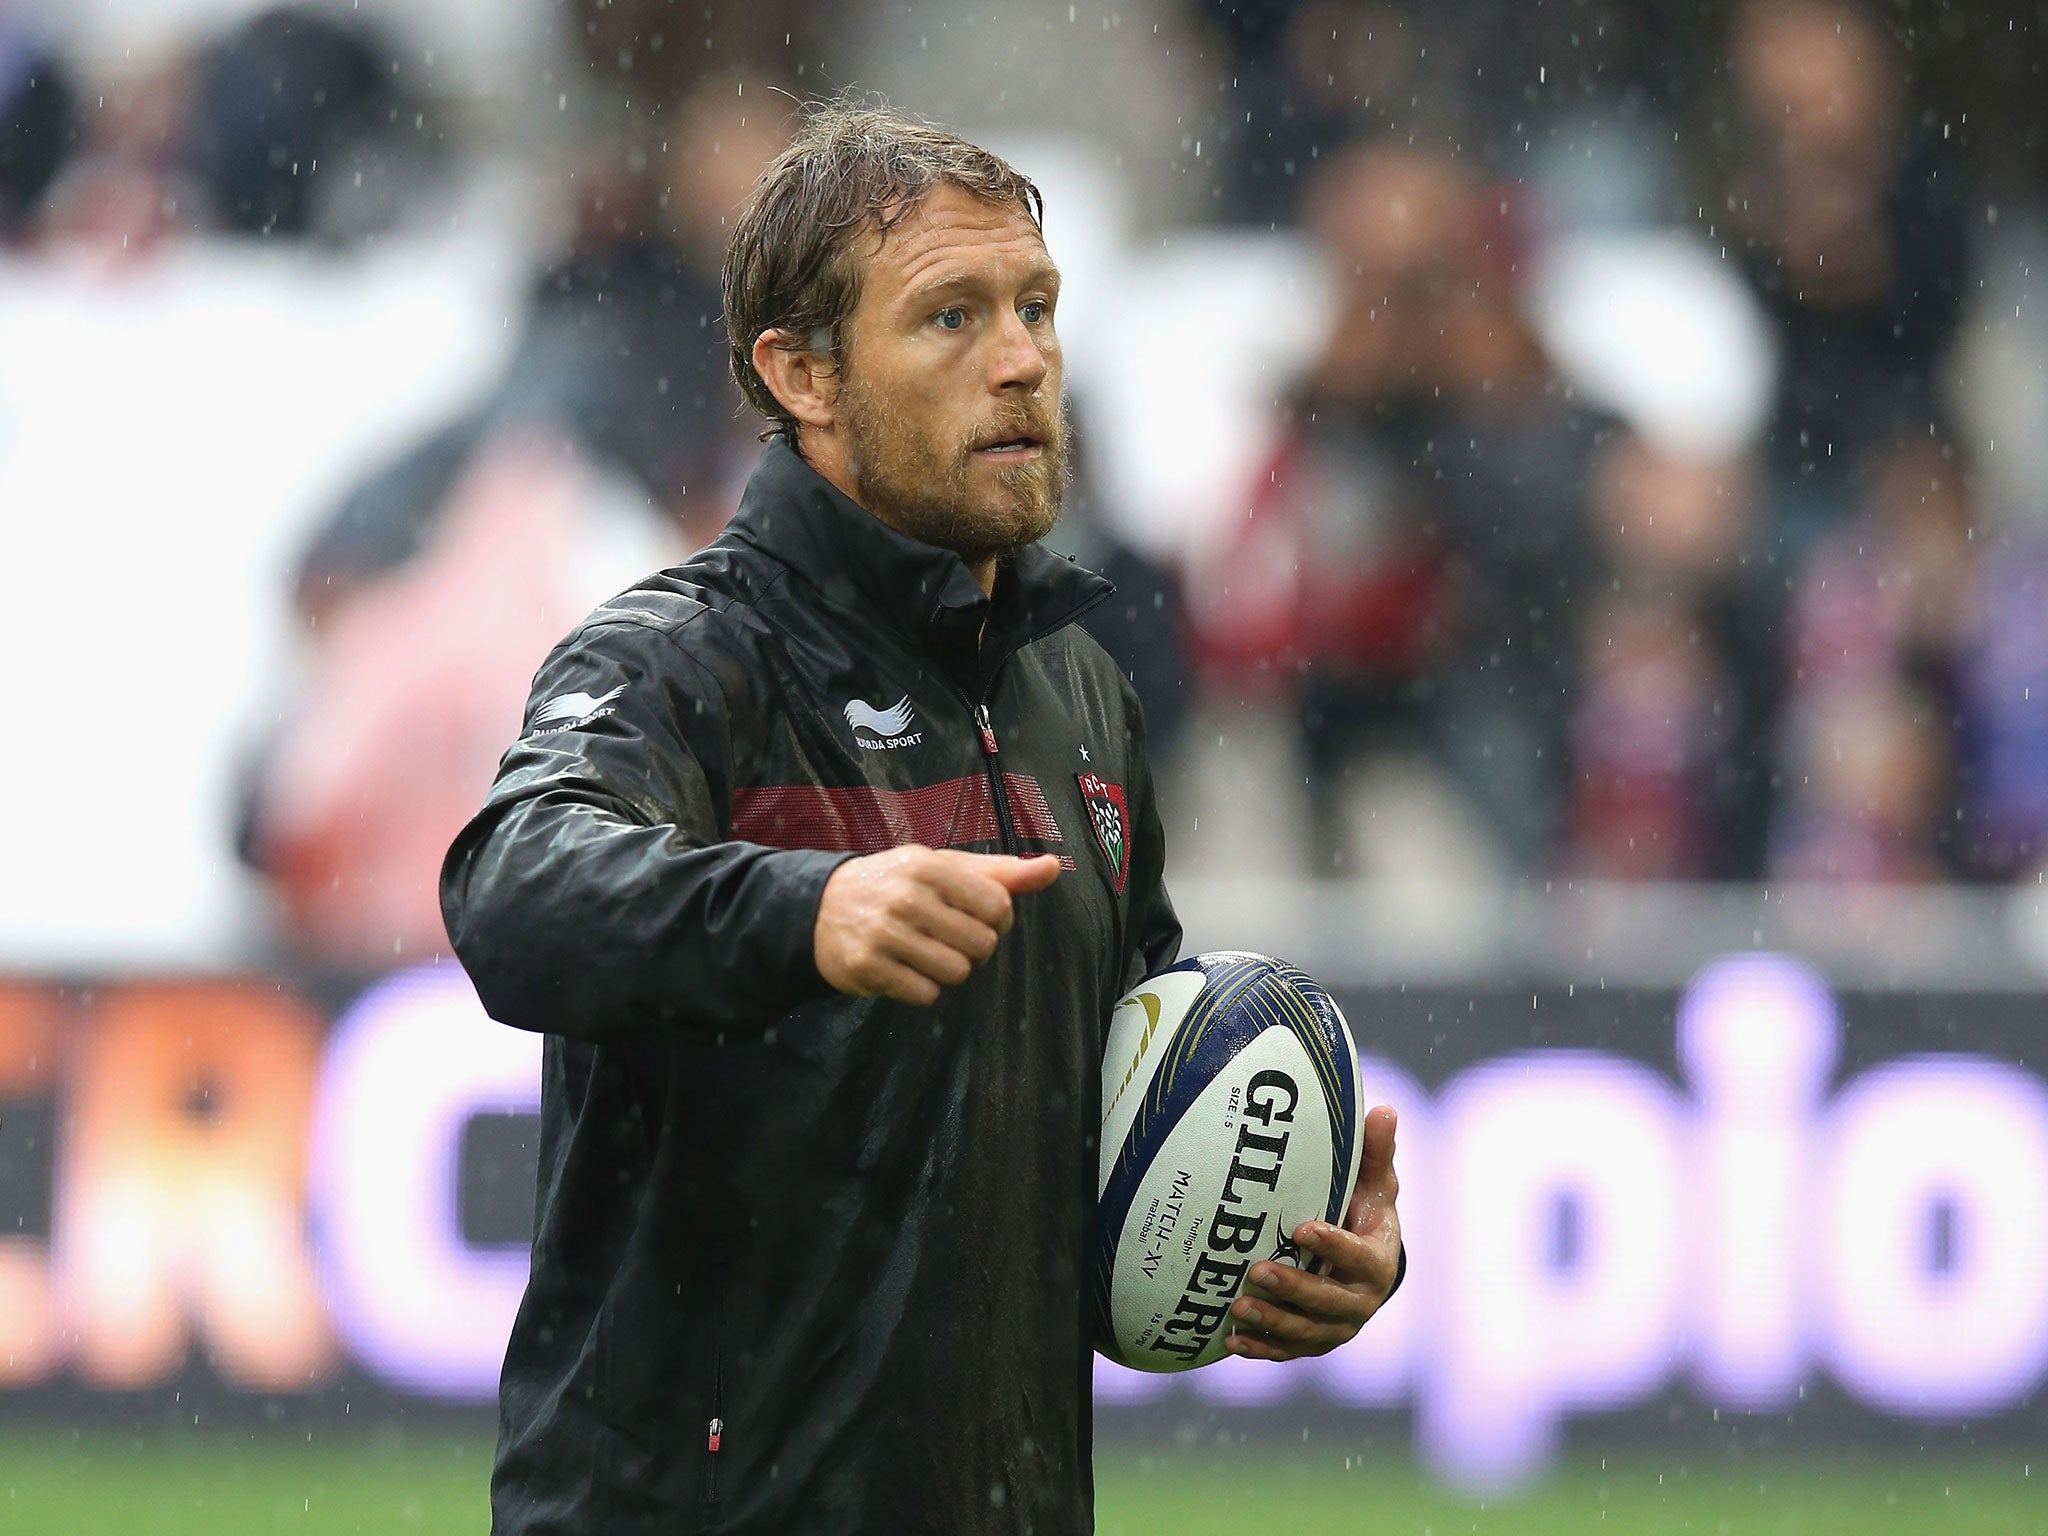 Jonny Wilkinson is currently assisting Eddie Jones' England squad in the kicking department